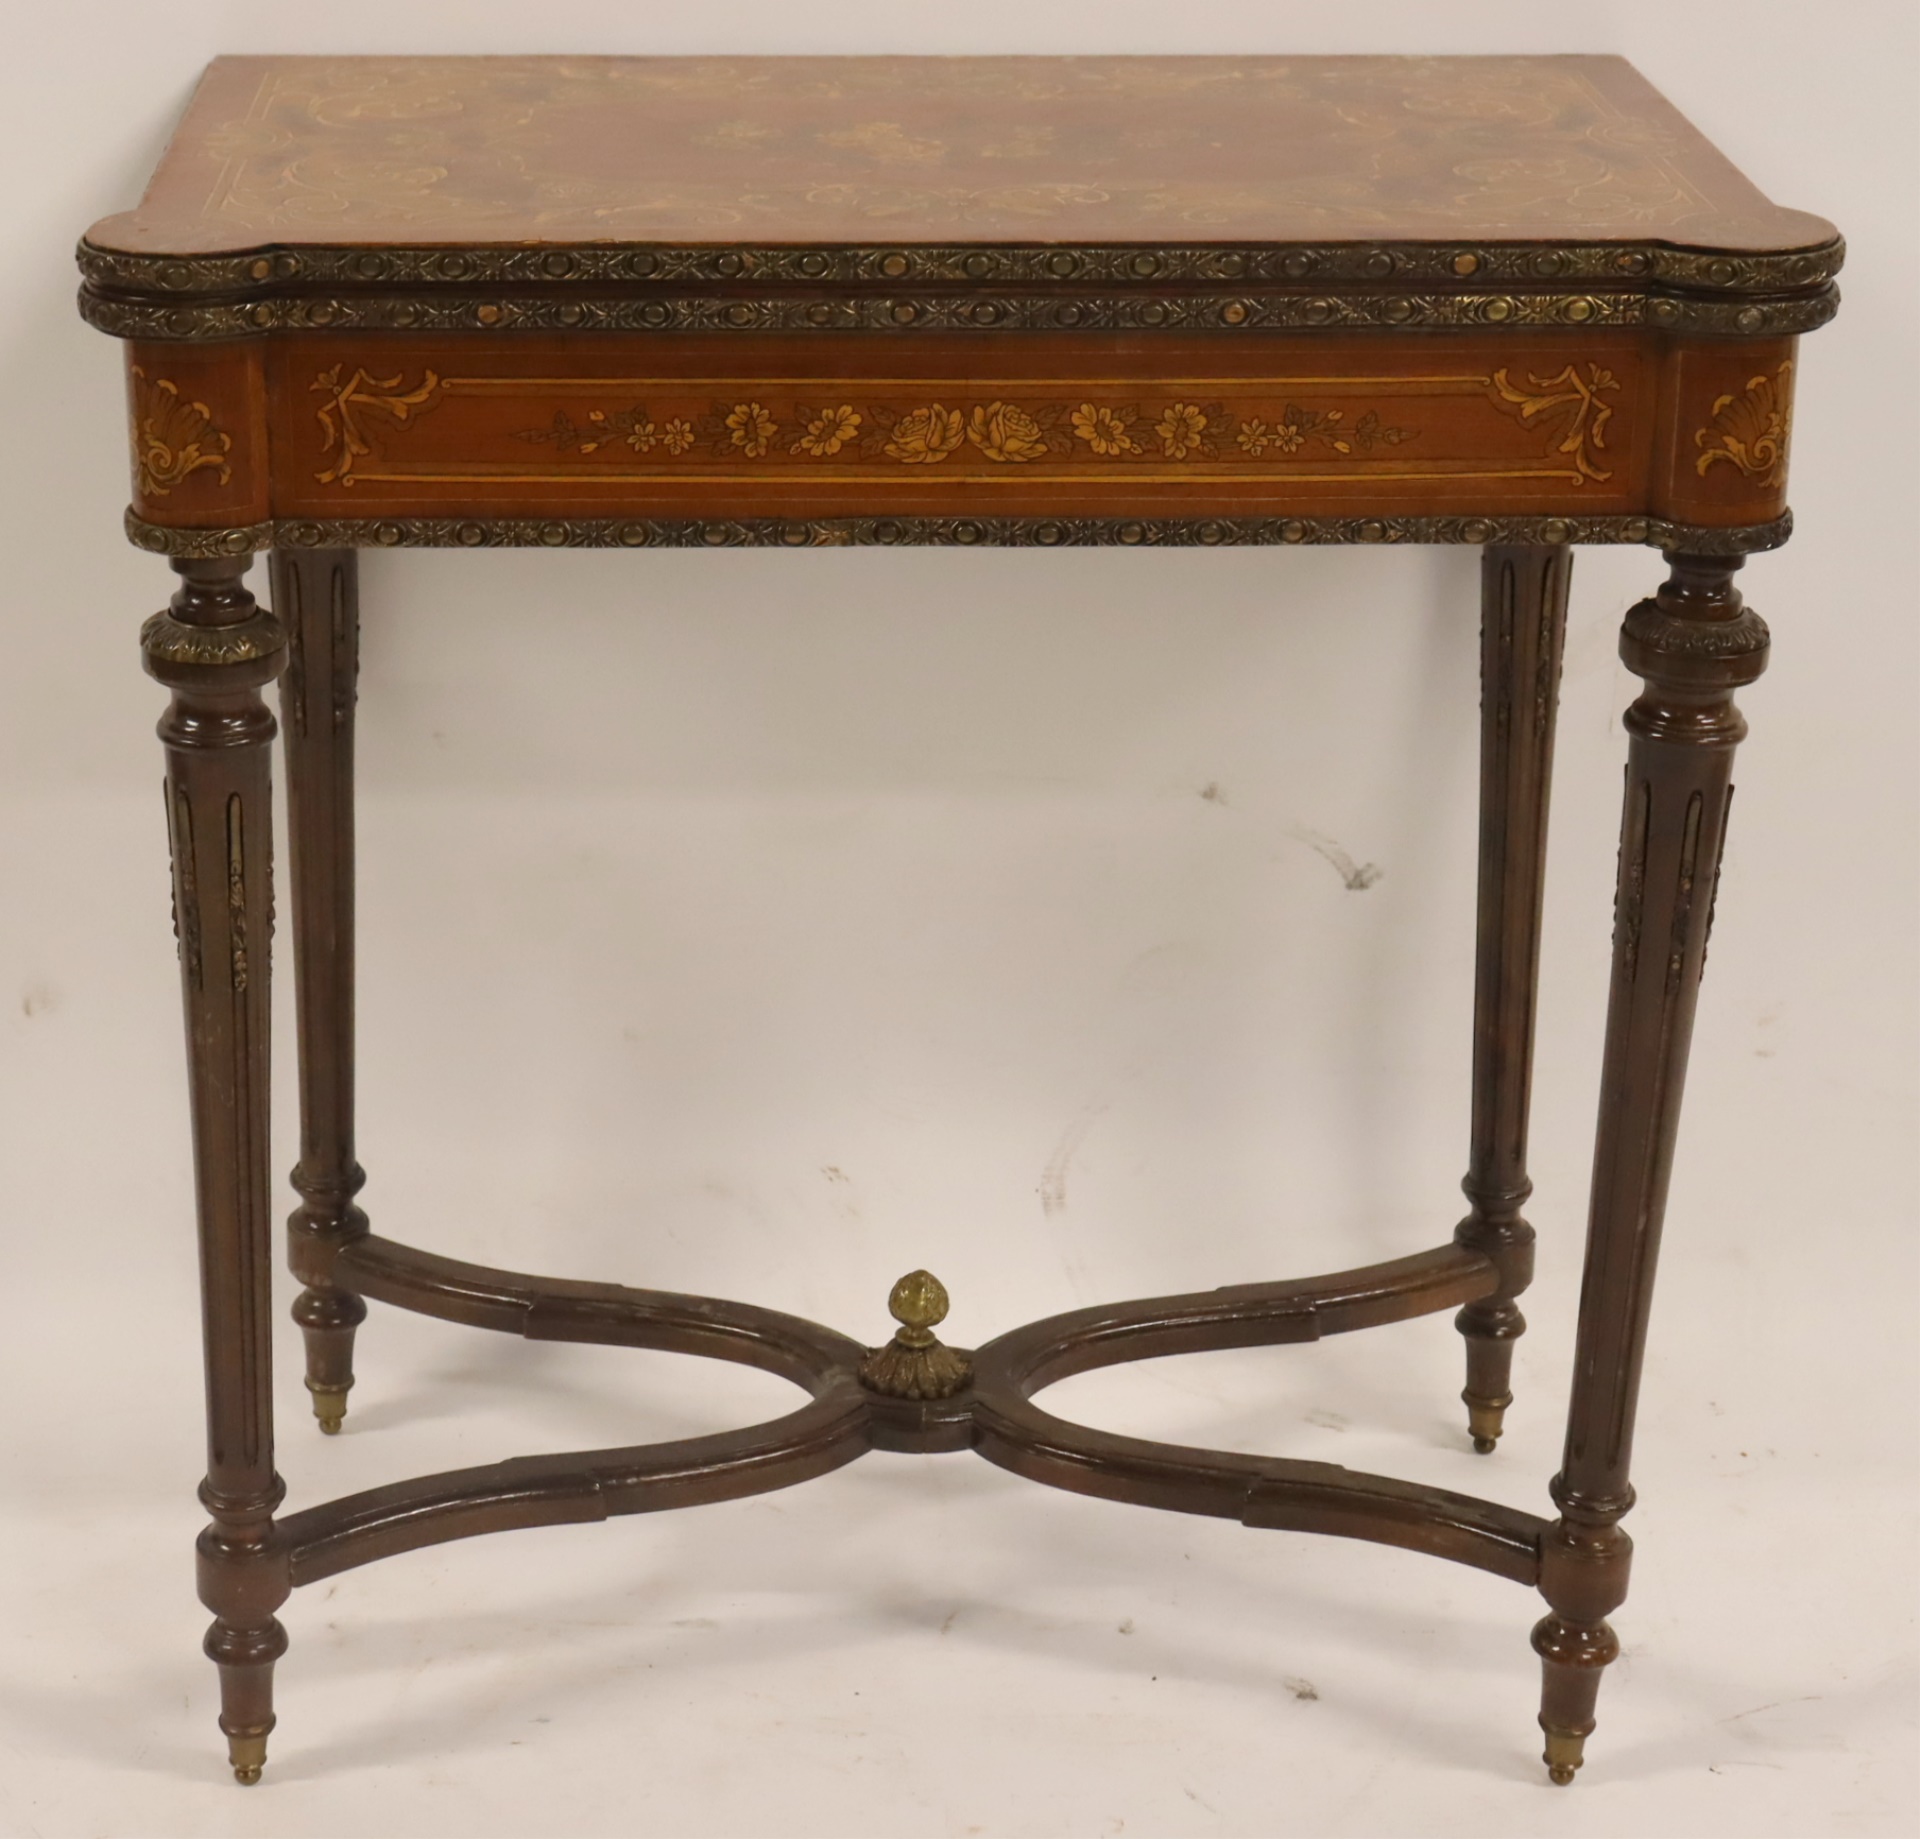 LOUIS XV1 STYLE MARQUETRY INLAID 3b6f84